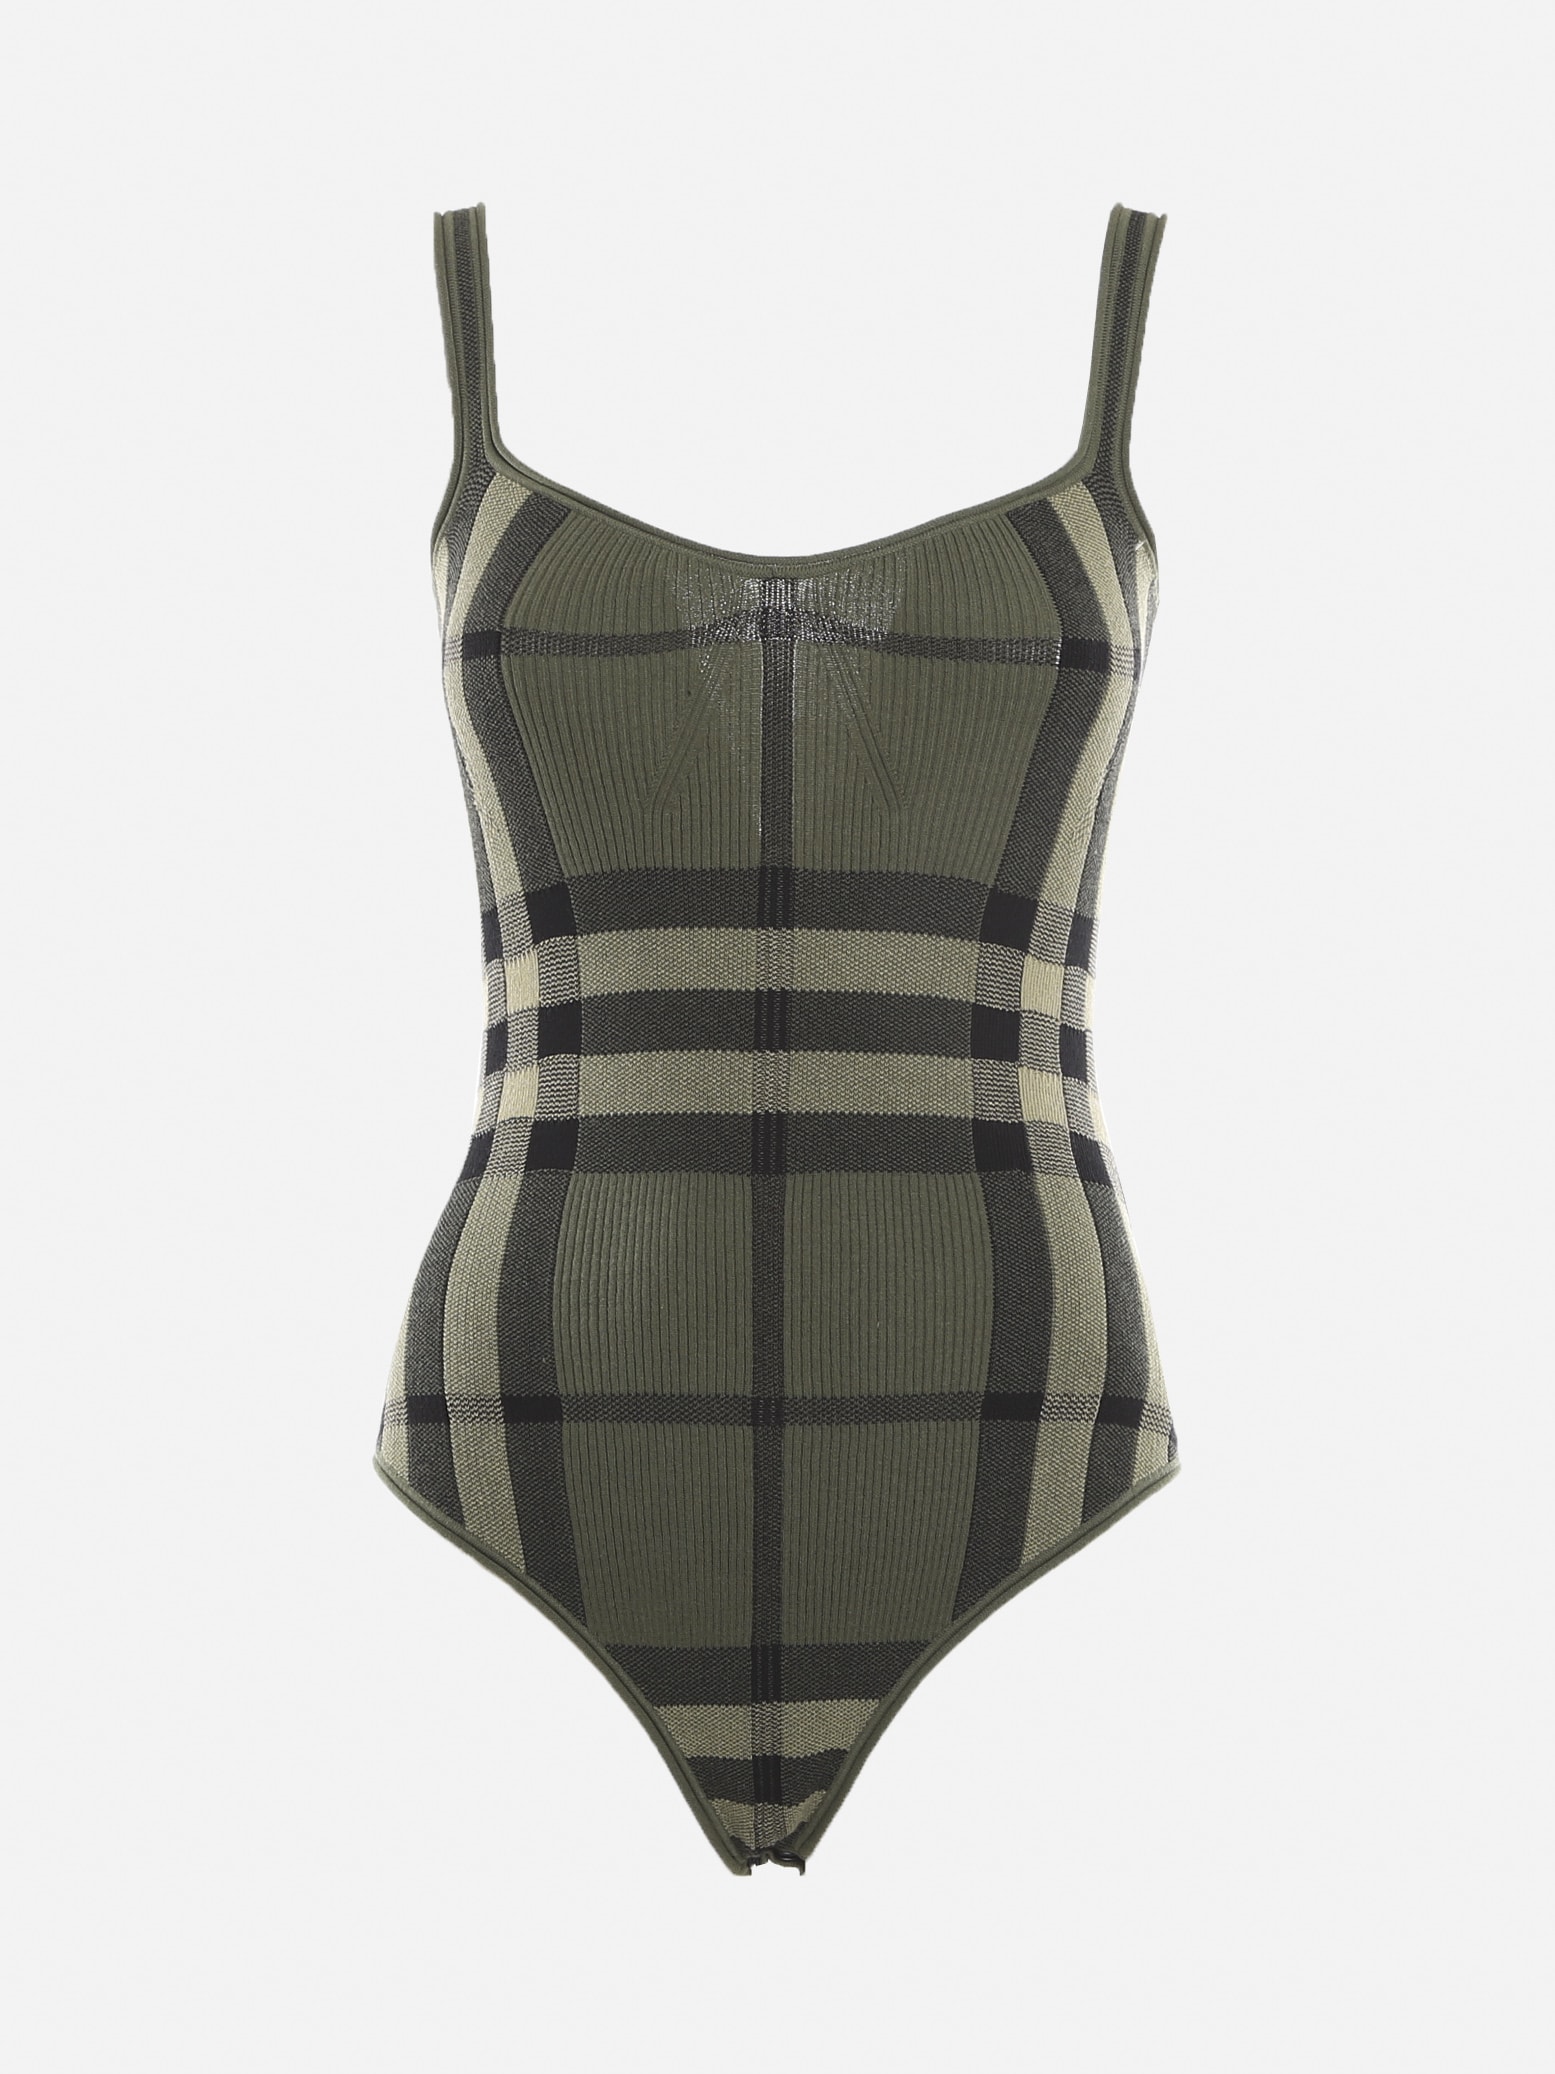 Burberry Cotton Blend Body With All-over Intarsia Tartan Motif